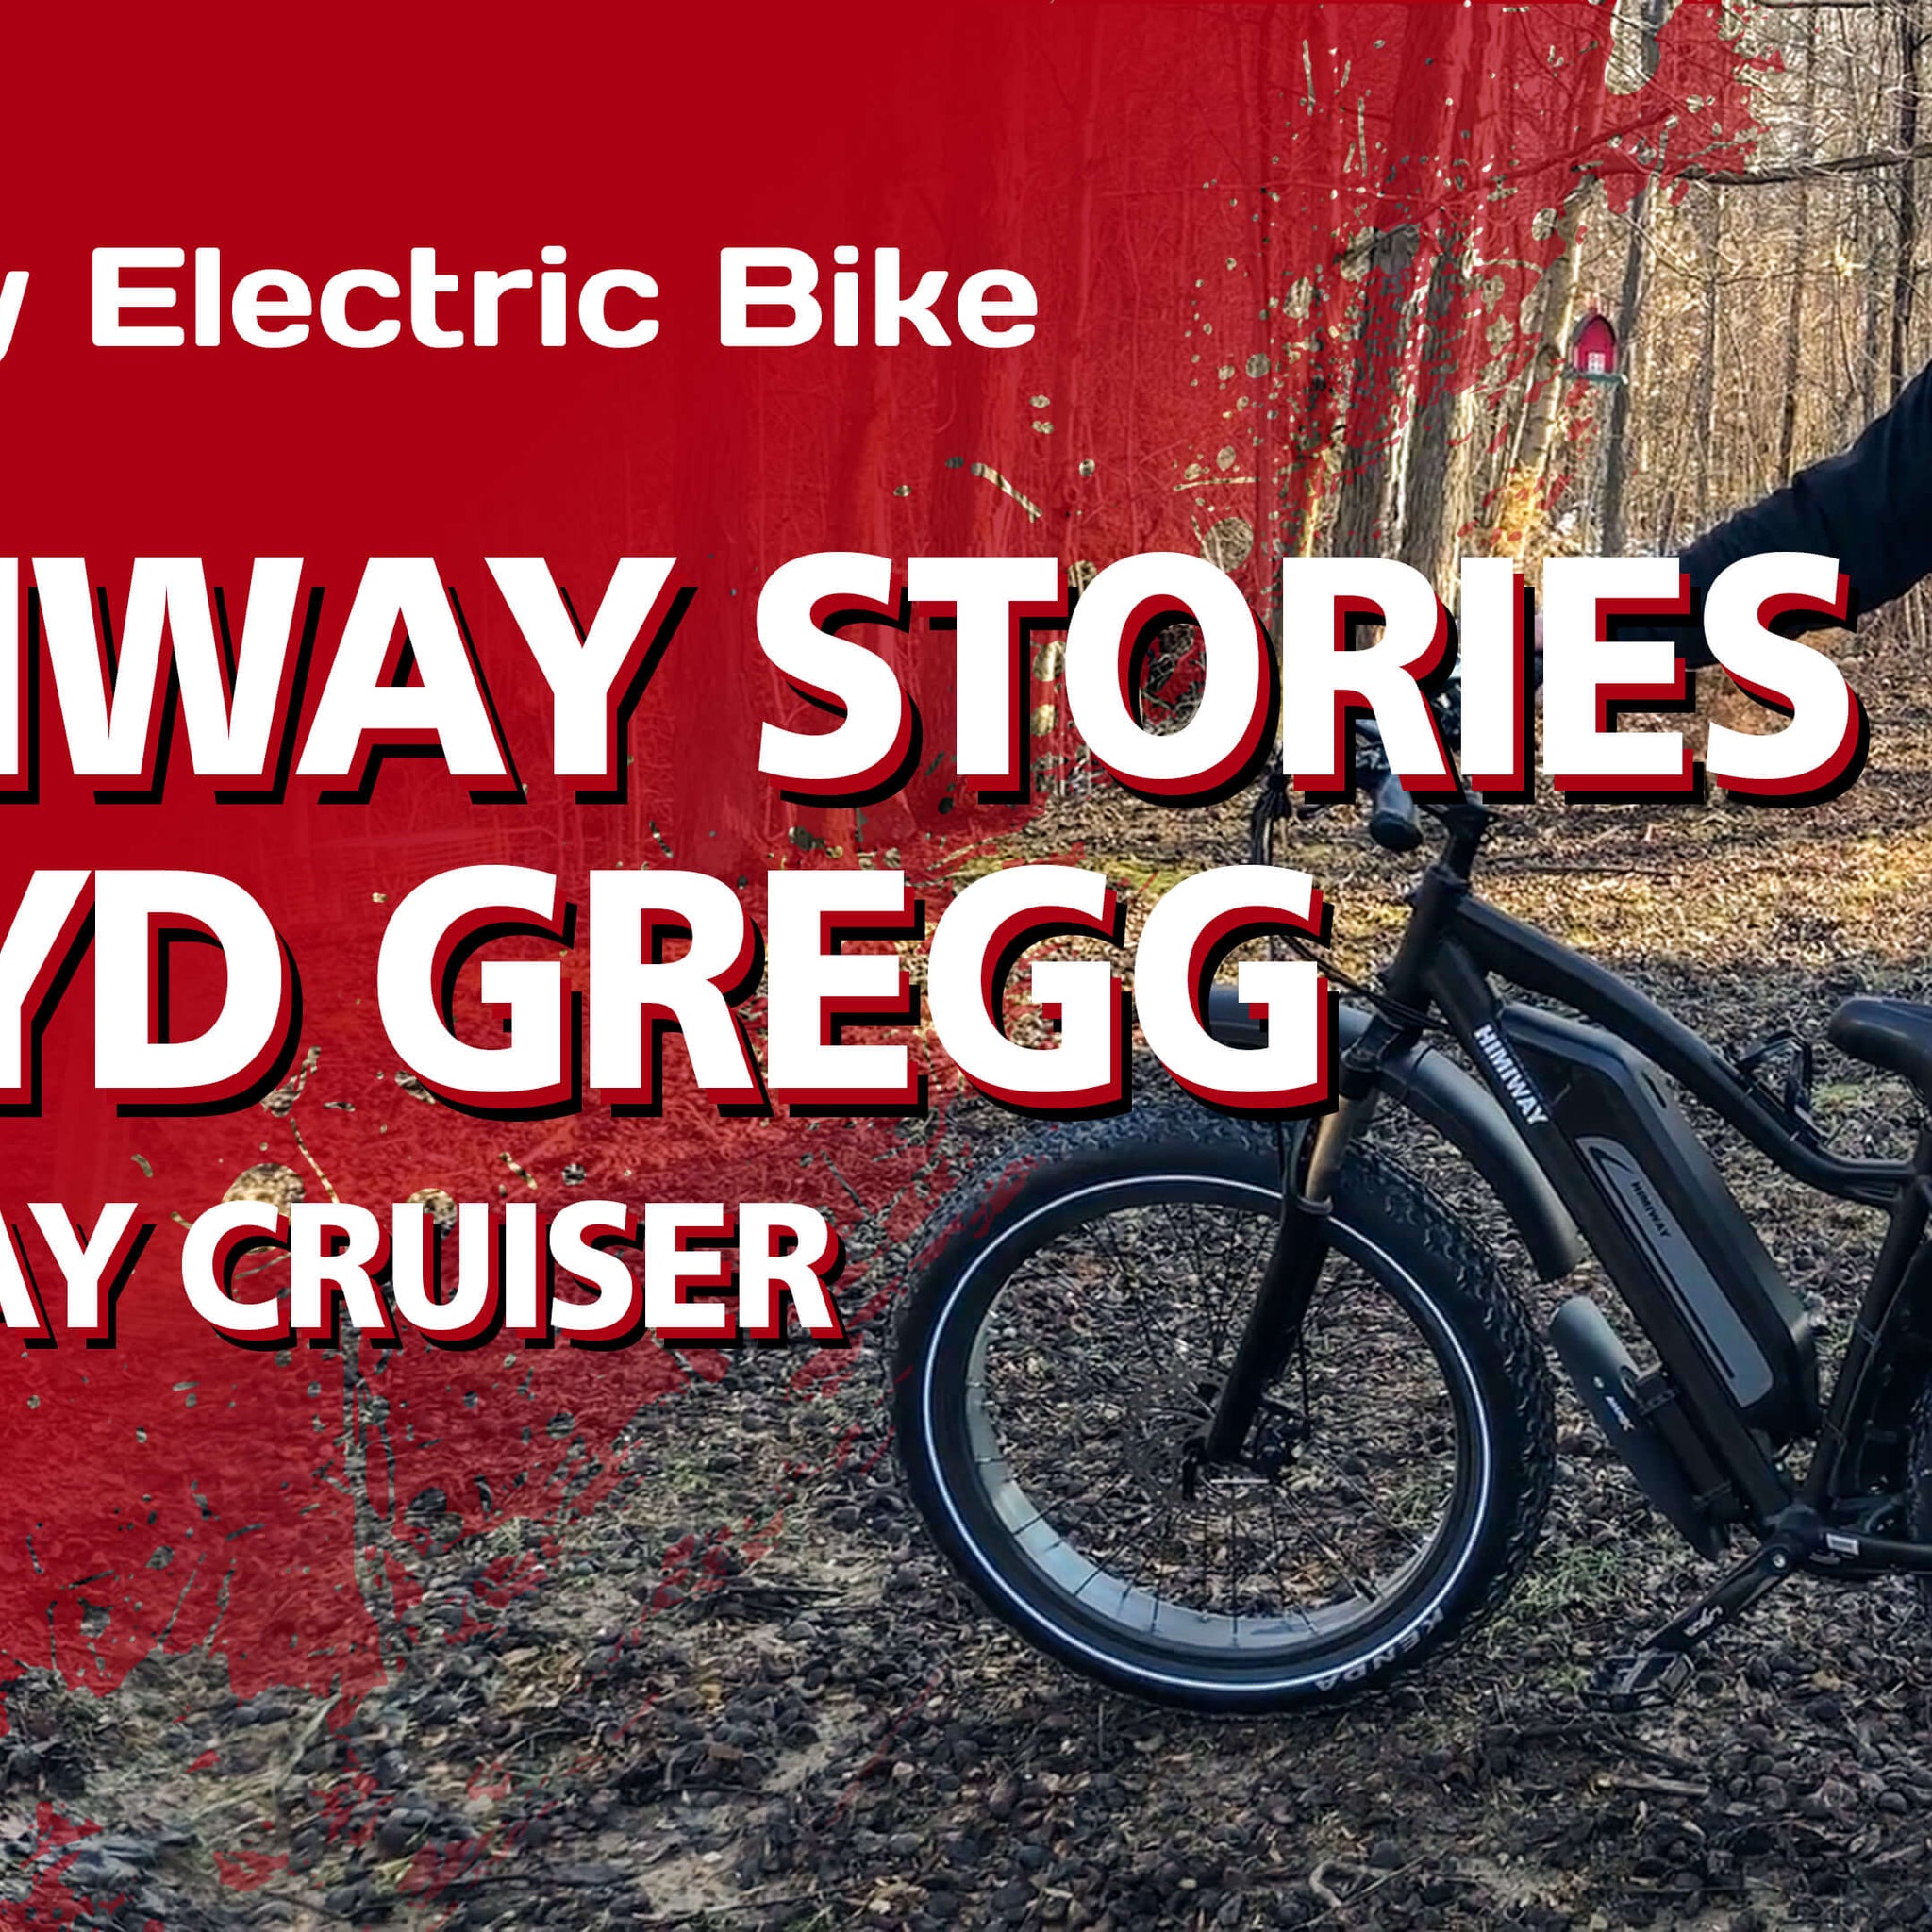 Himiway Story: The Best Electric Bike for Hunter